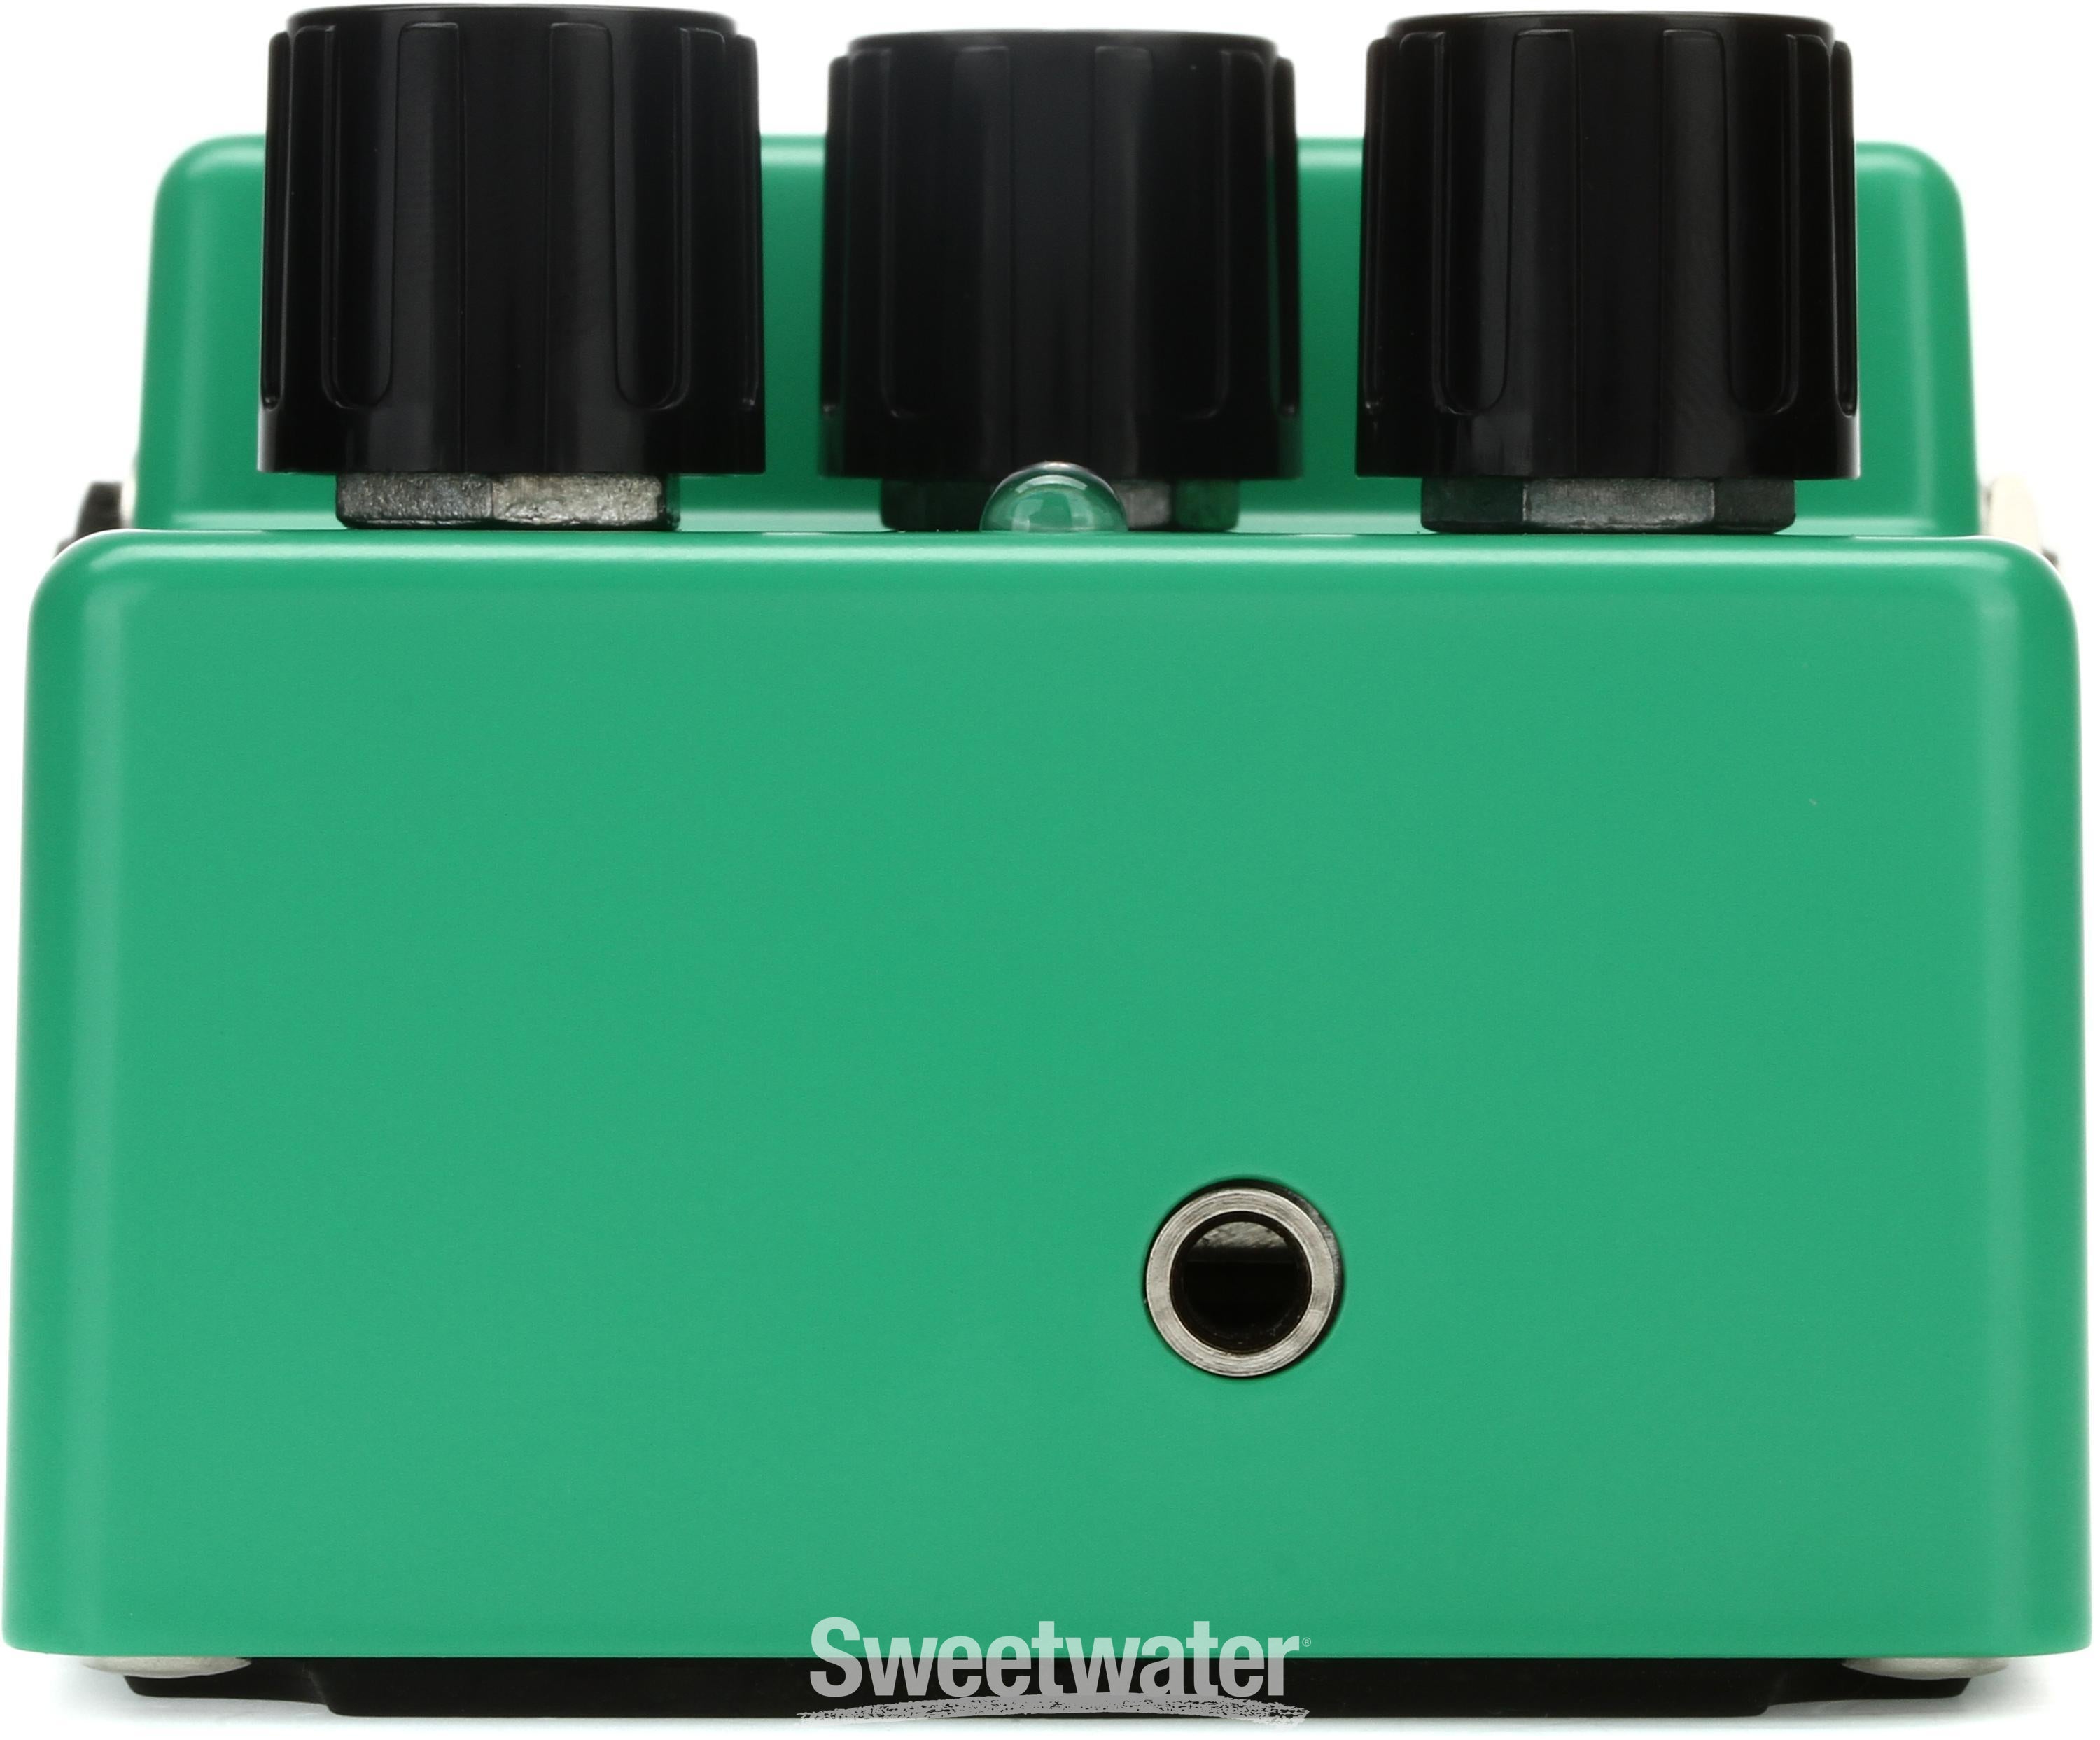 Ibanez TS808 Original Tube Screamer Overdrive Pedal | Sweetwater